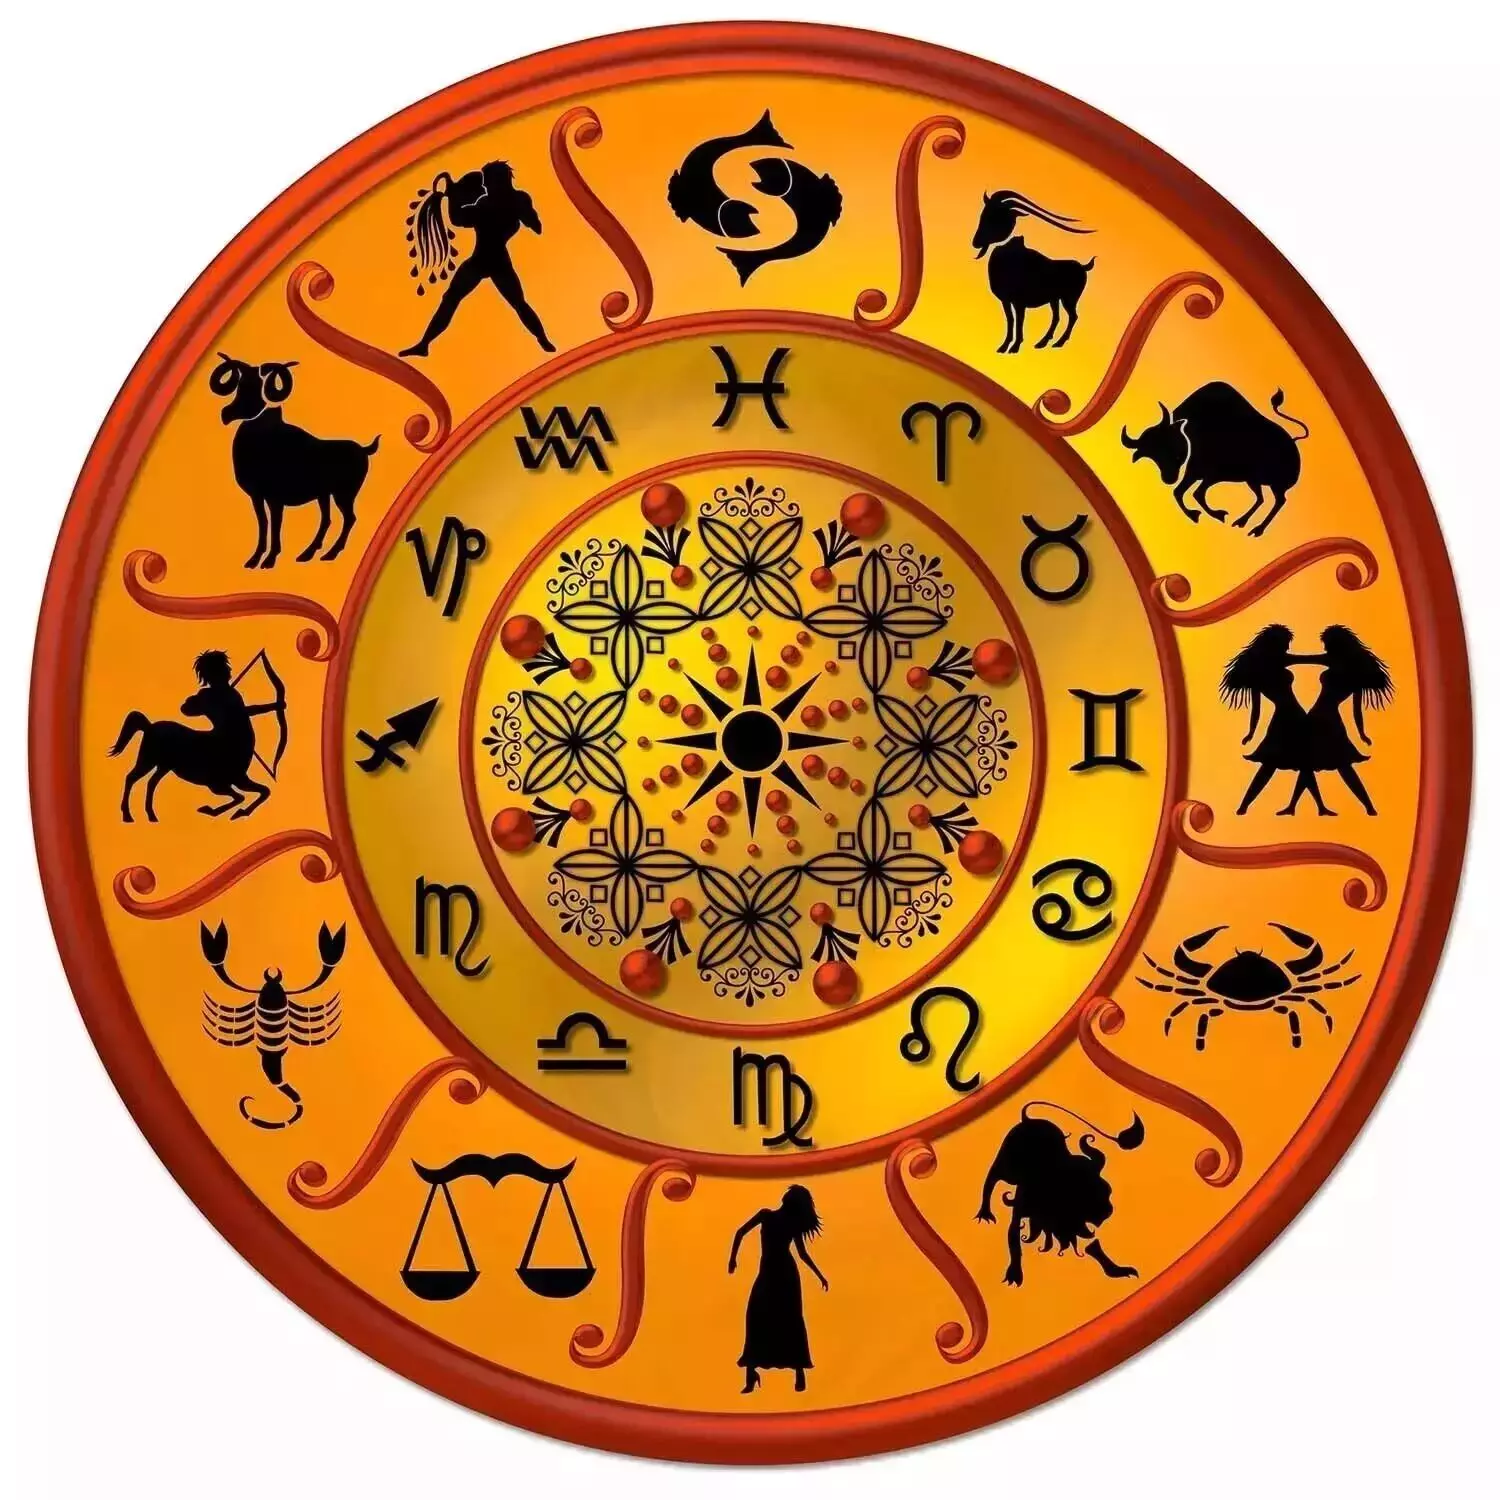 11 March – Know your todays horoscope